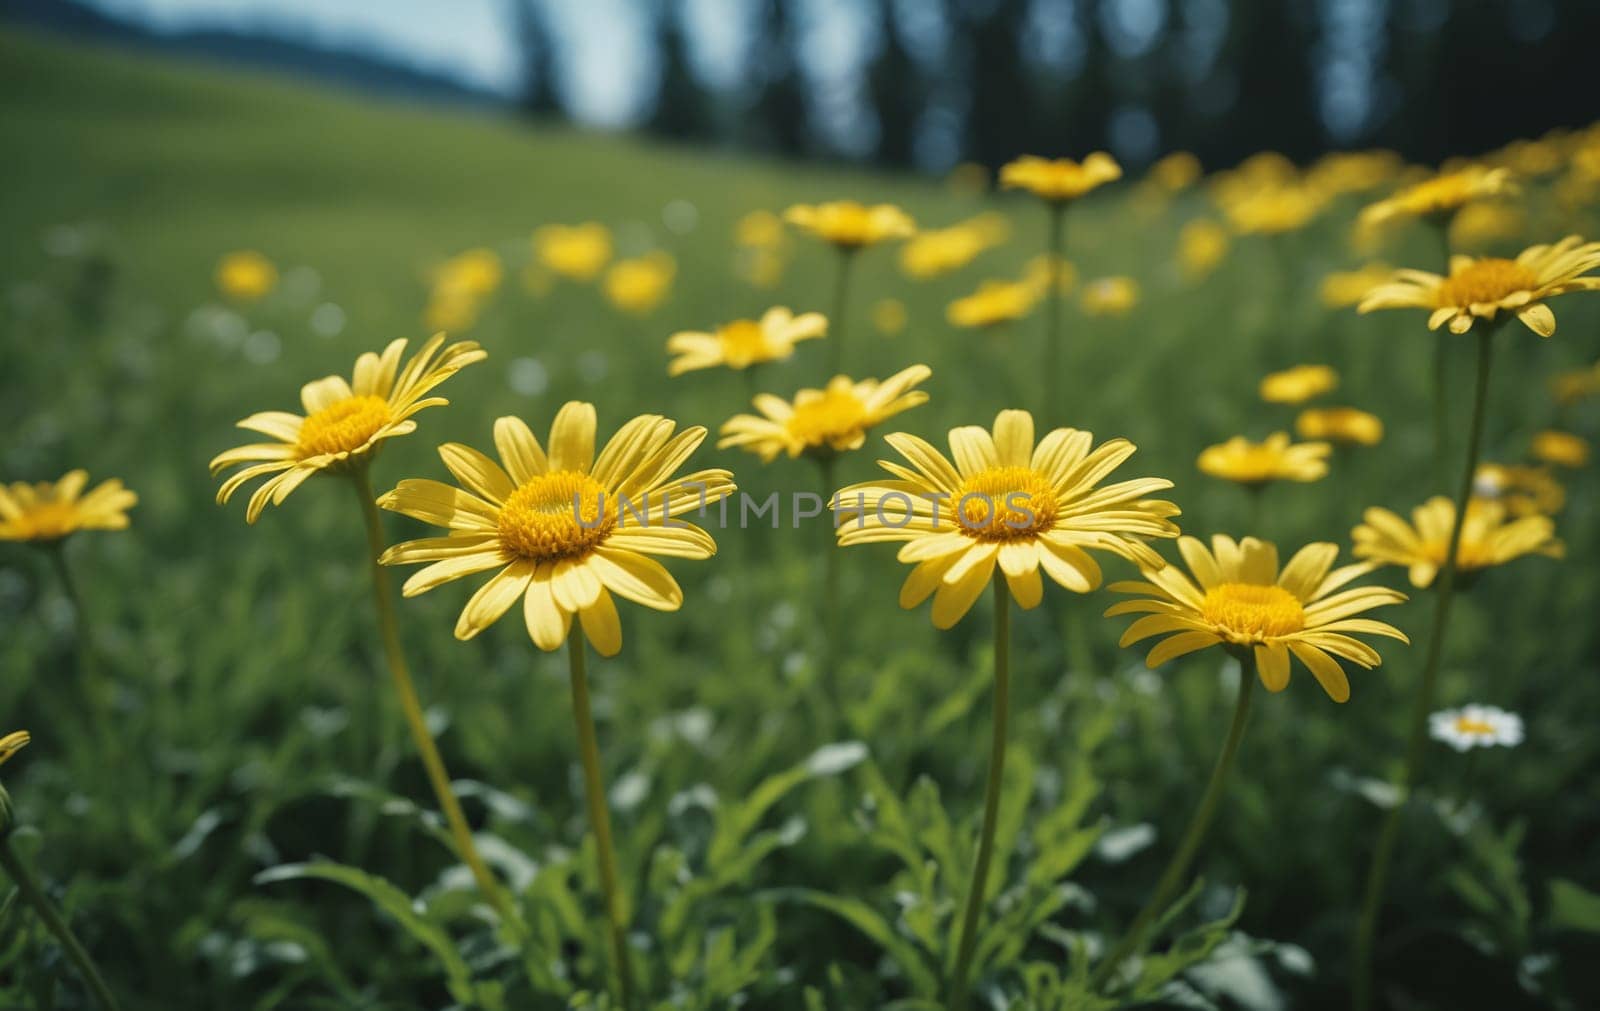 Yellow daisies in the garden. Shallow depth of field